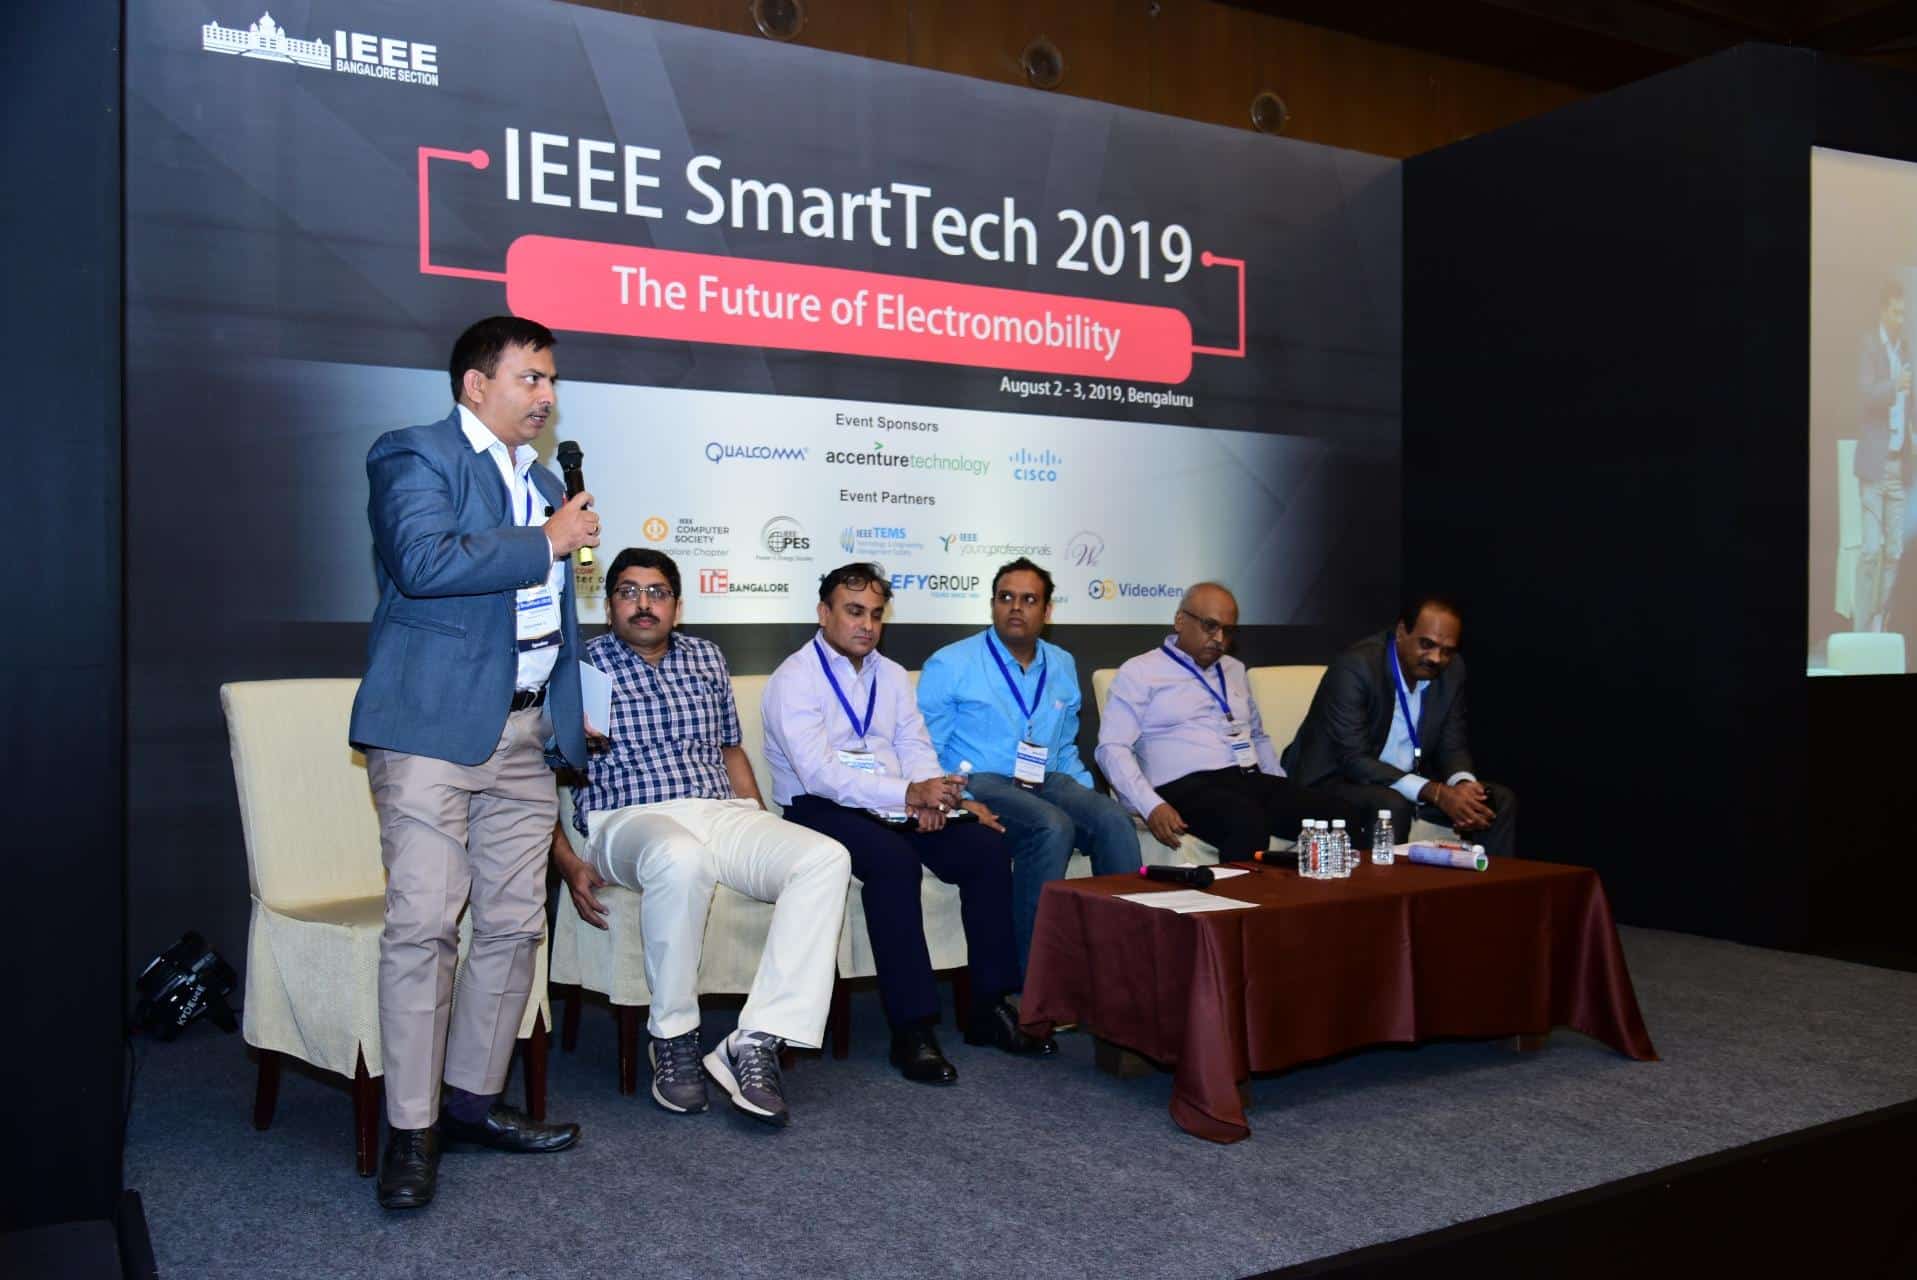 IEEE SmartTech 2019: The Future of Electromobility in a connected world